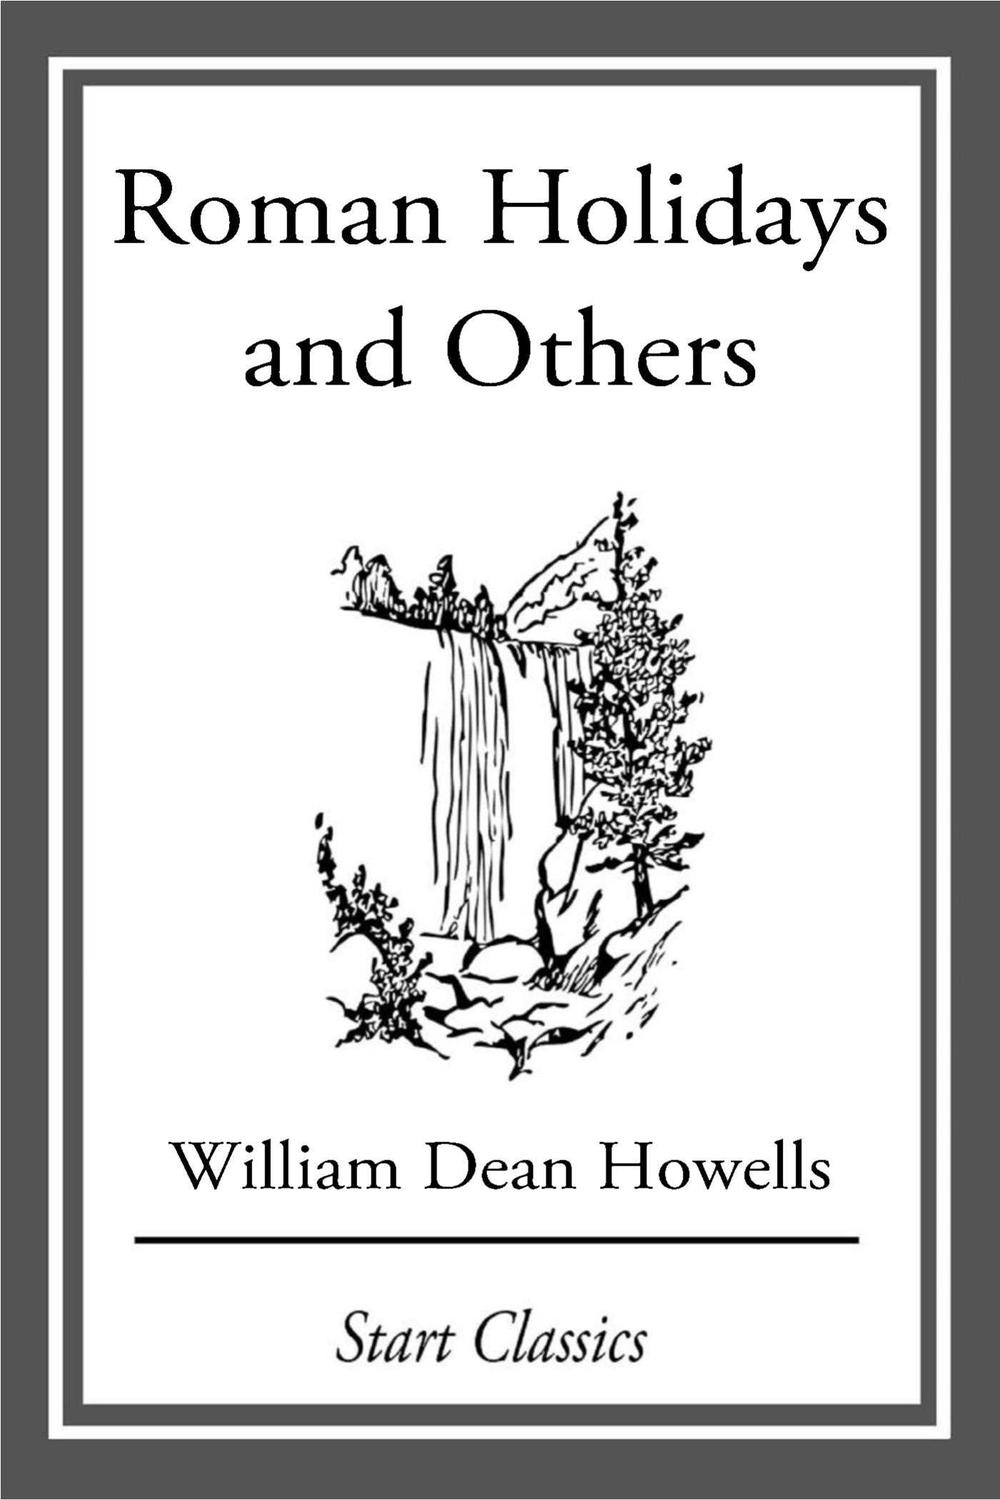 Roman Holidays and Others - William Dean Howells,,